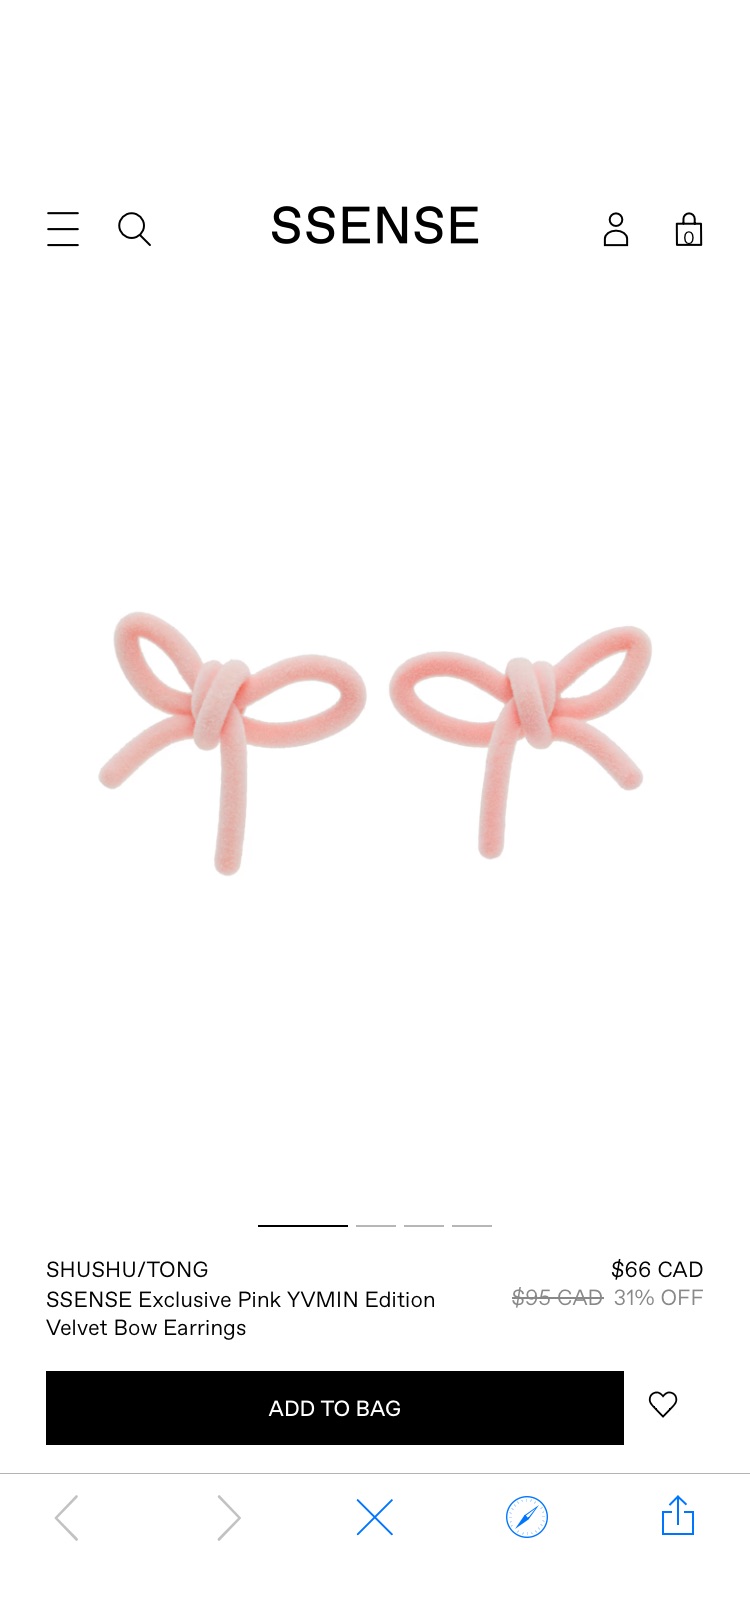 SSENSE Canada Exclusive Pink YVMIN Edition Velvet Bow Earrings by SHUSHU/TONG on Sale